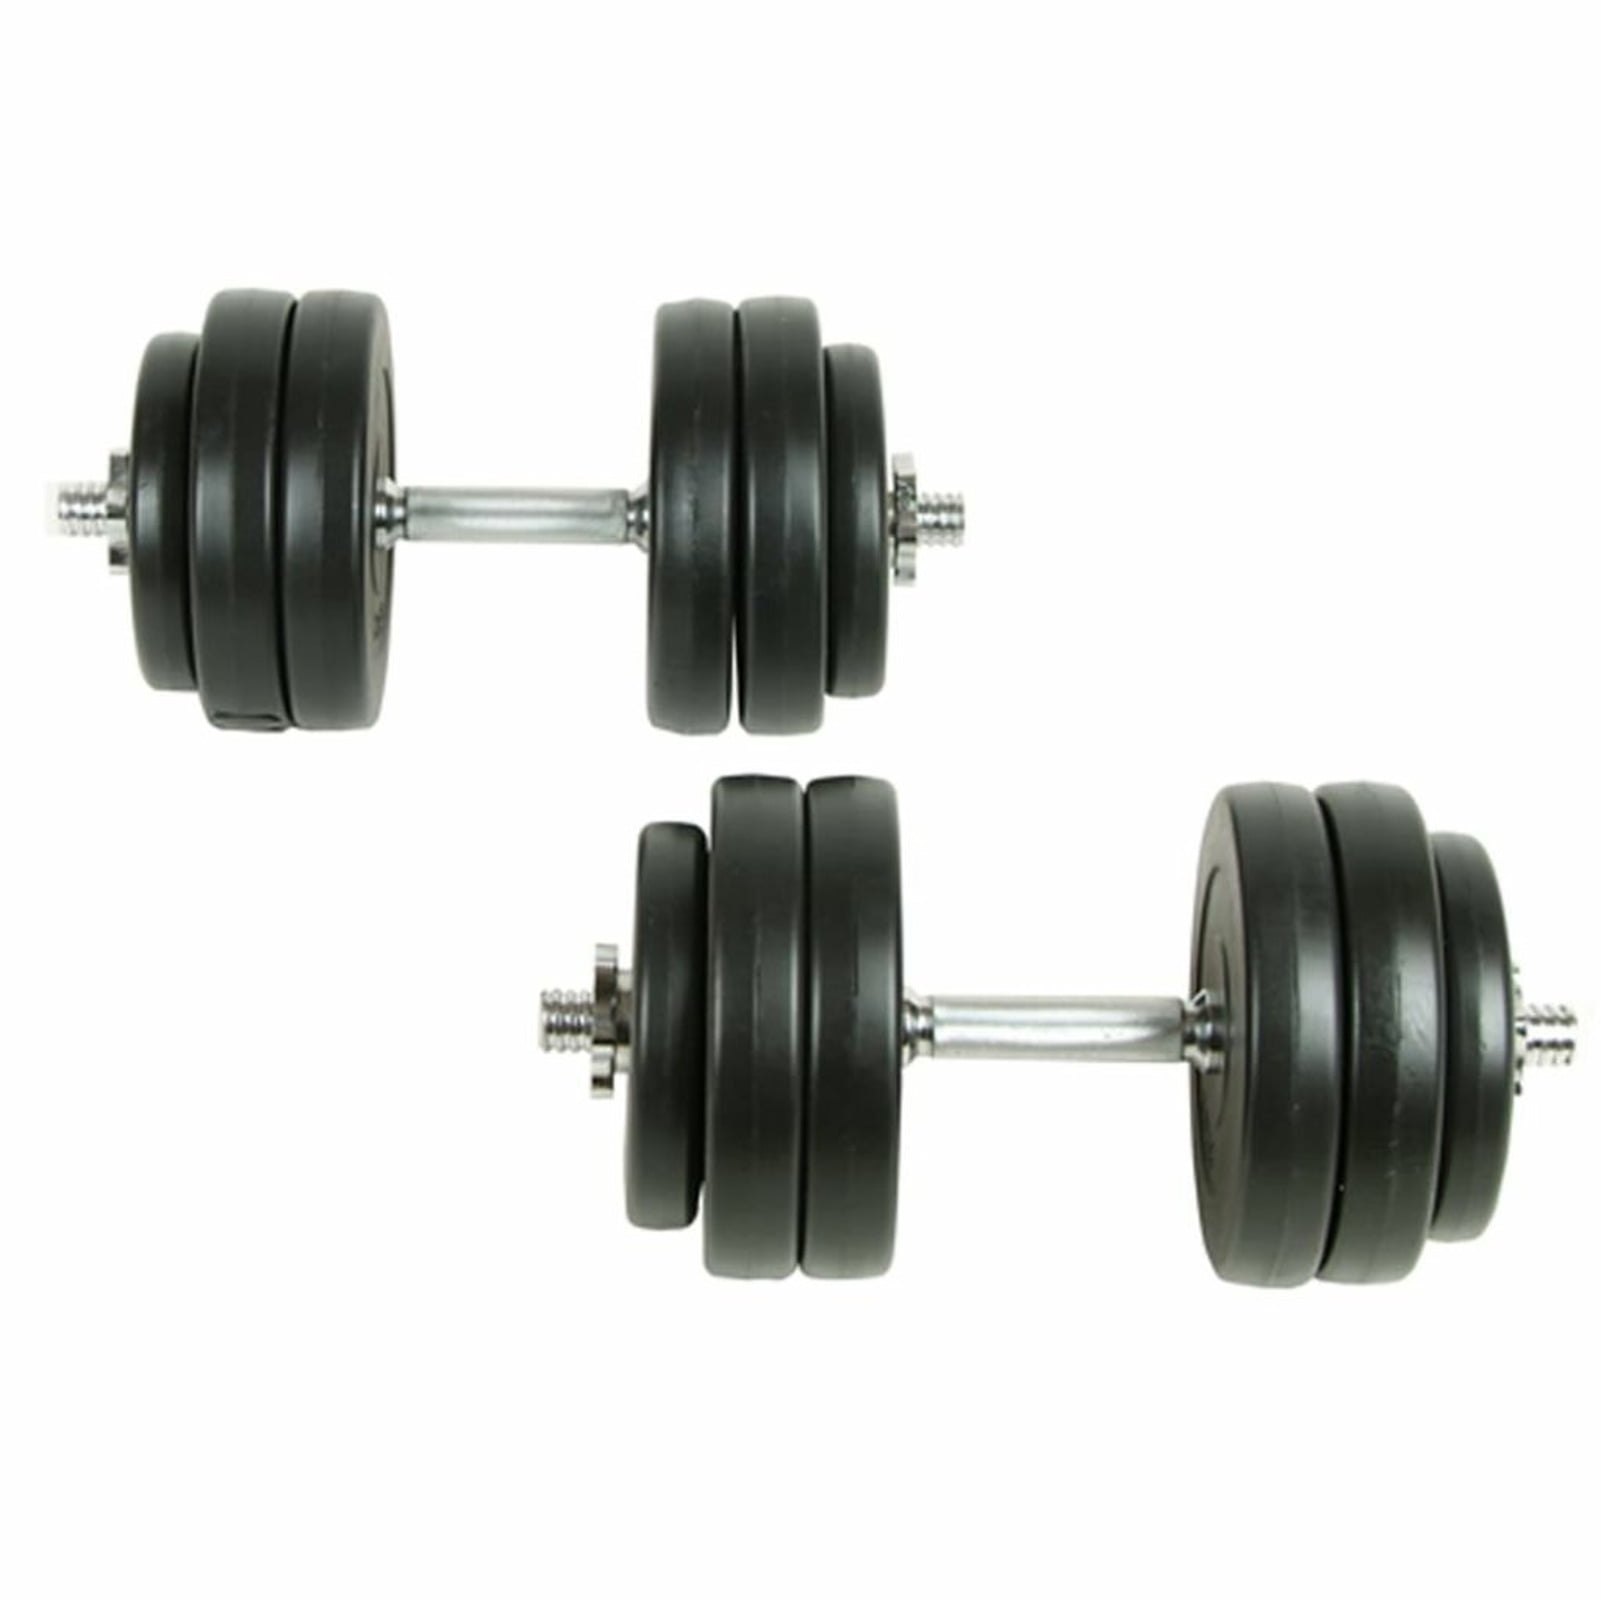 Details about   Totall 88LB Weight Dumbbell Set Cap Gym Barbell Plates Body Workout Adjustable H 